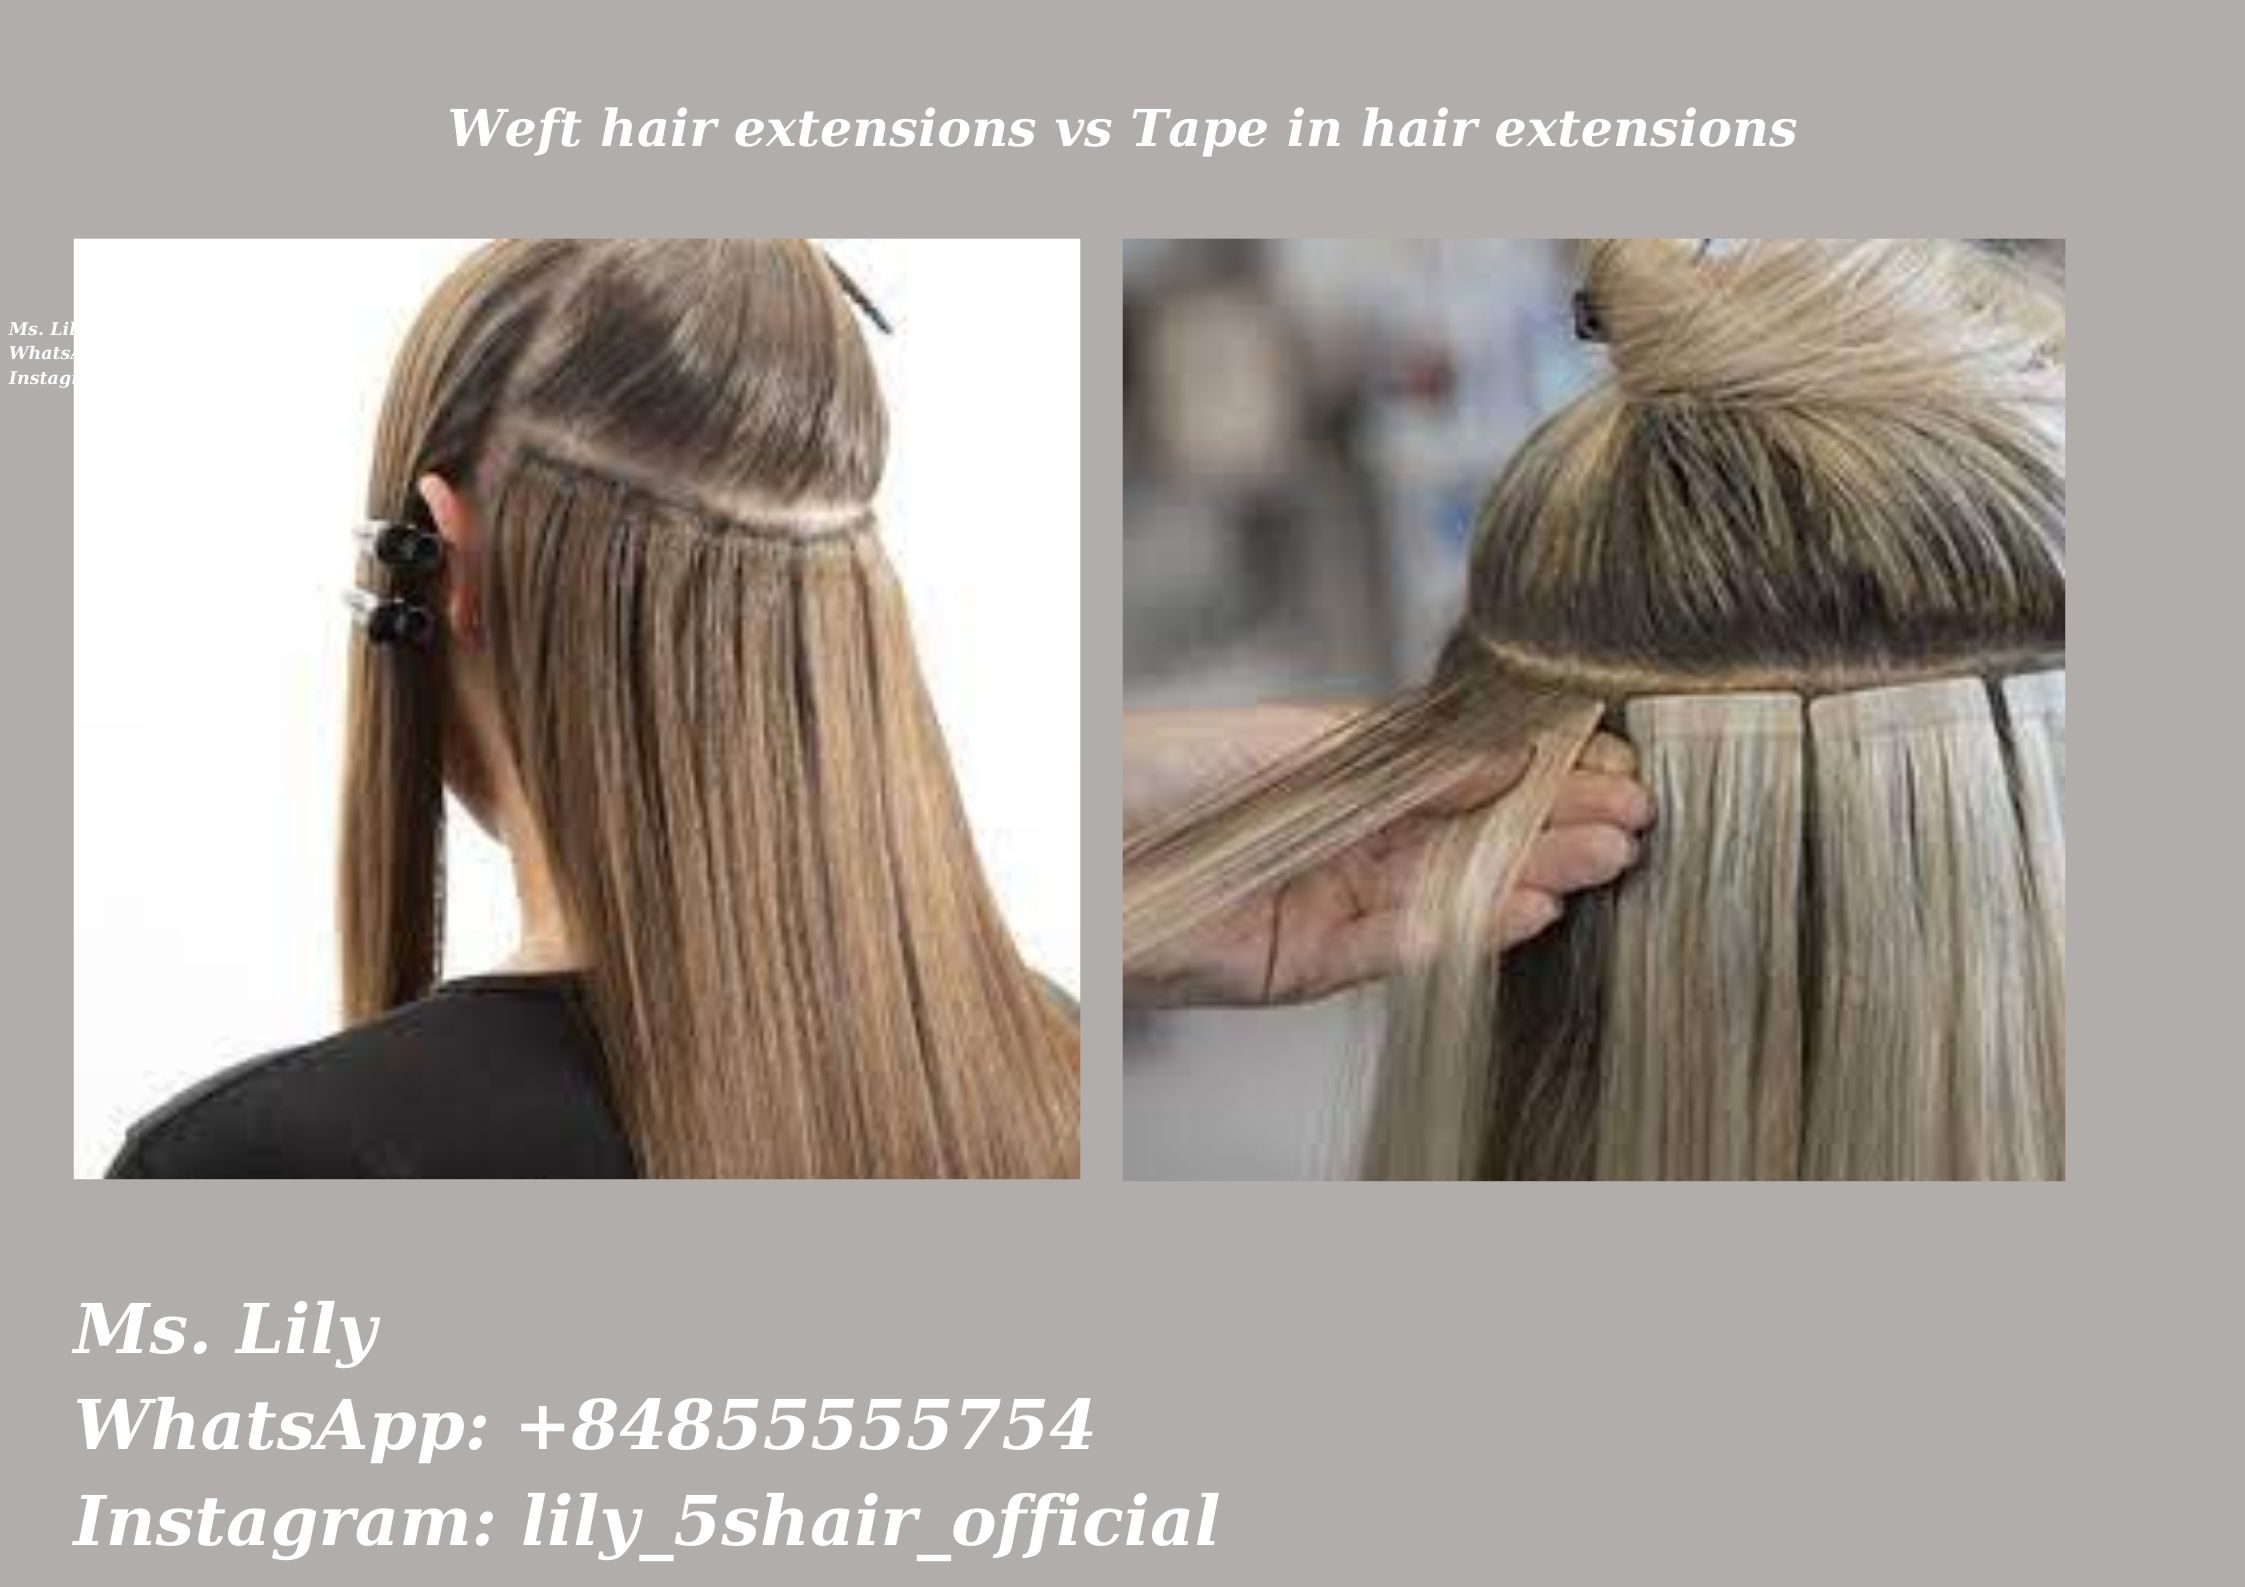 weft-hair-extensions-the-new-trend-of-the-hair-industry3